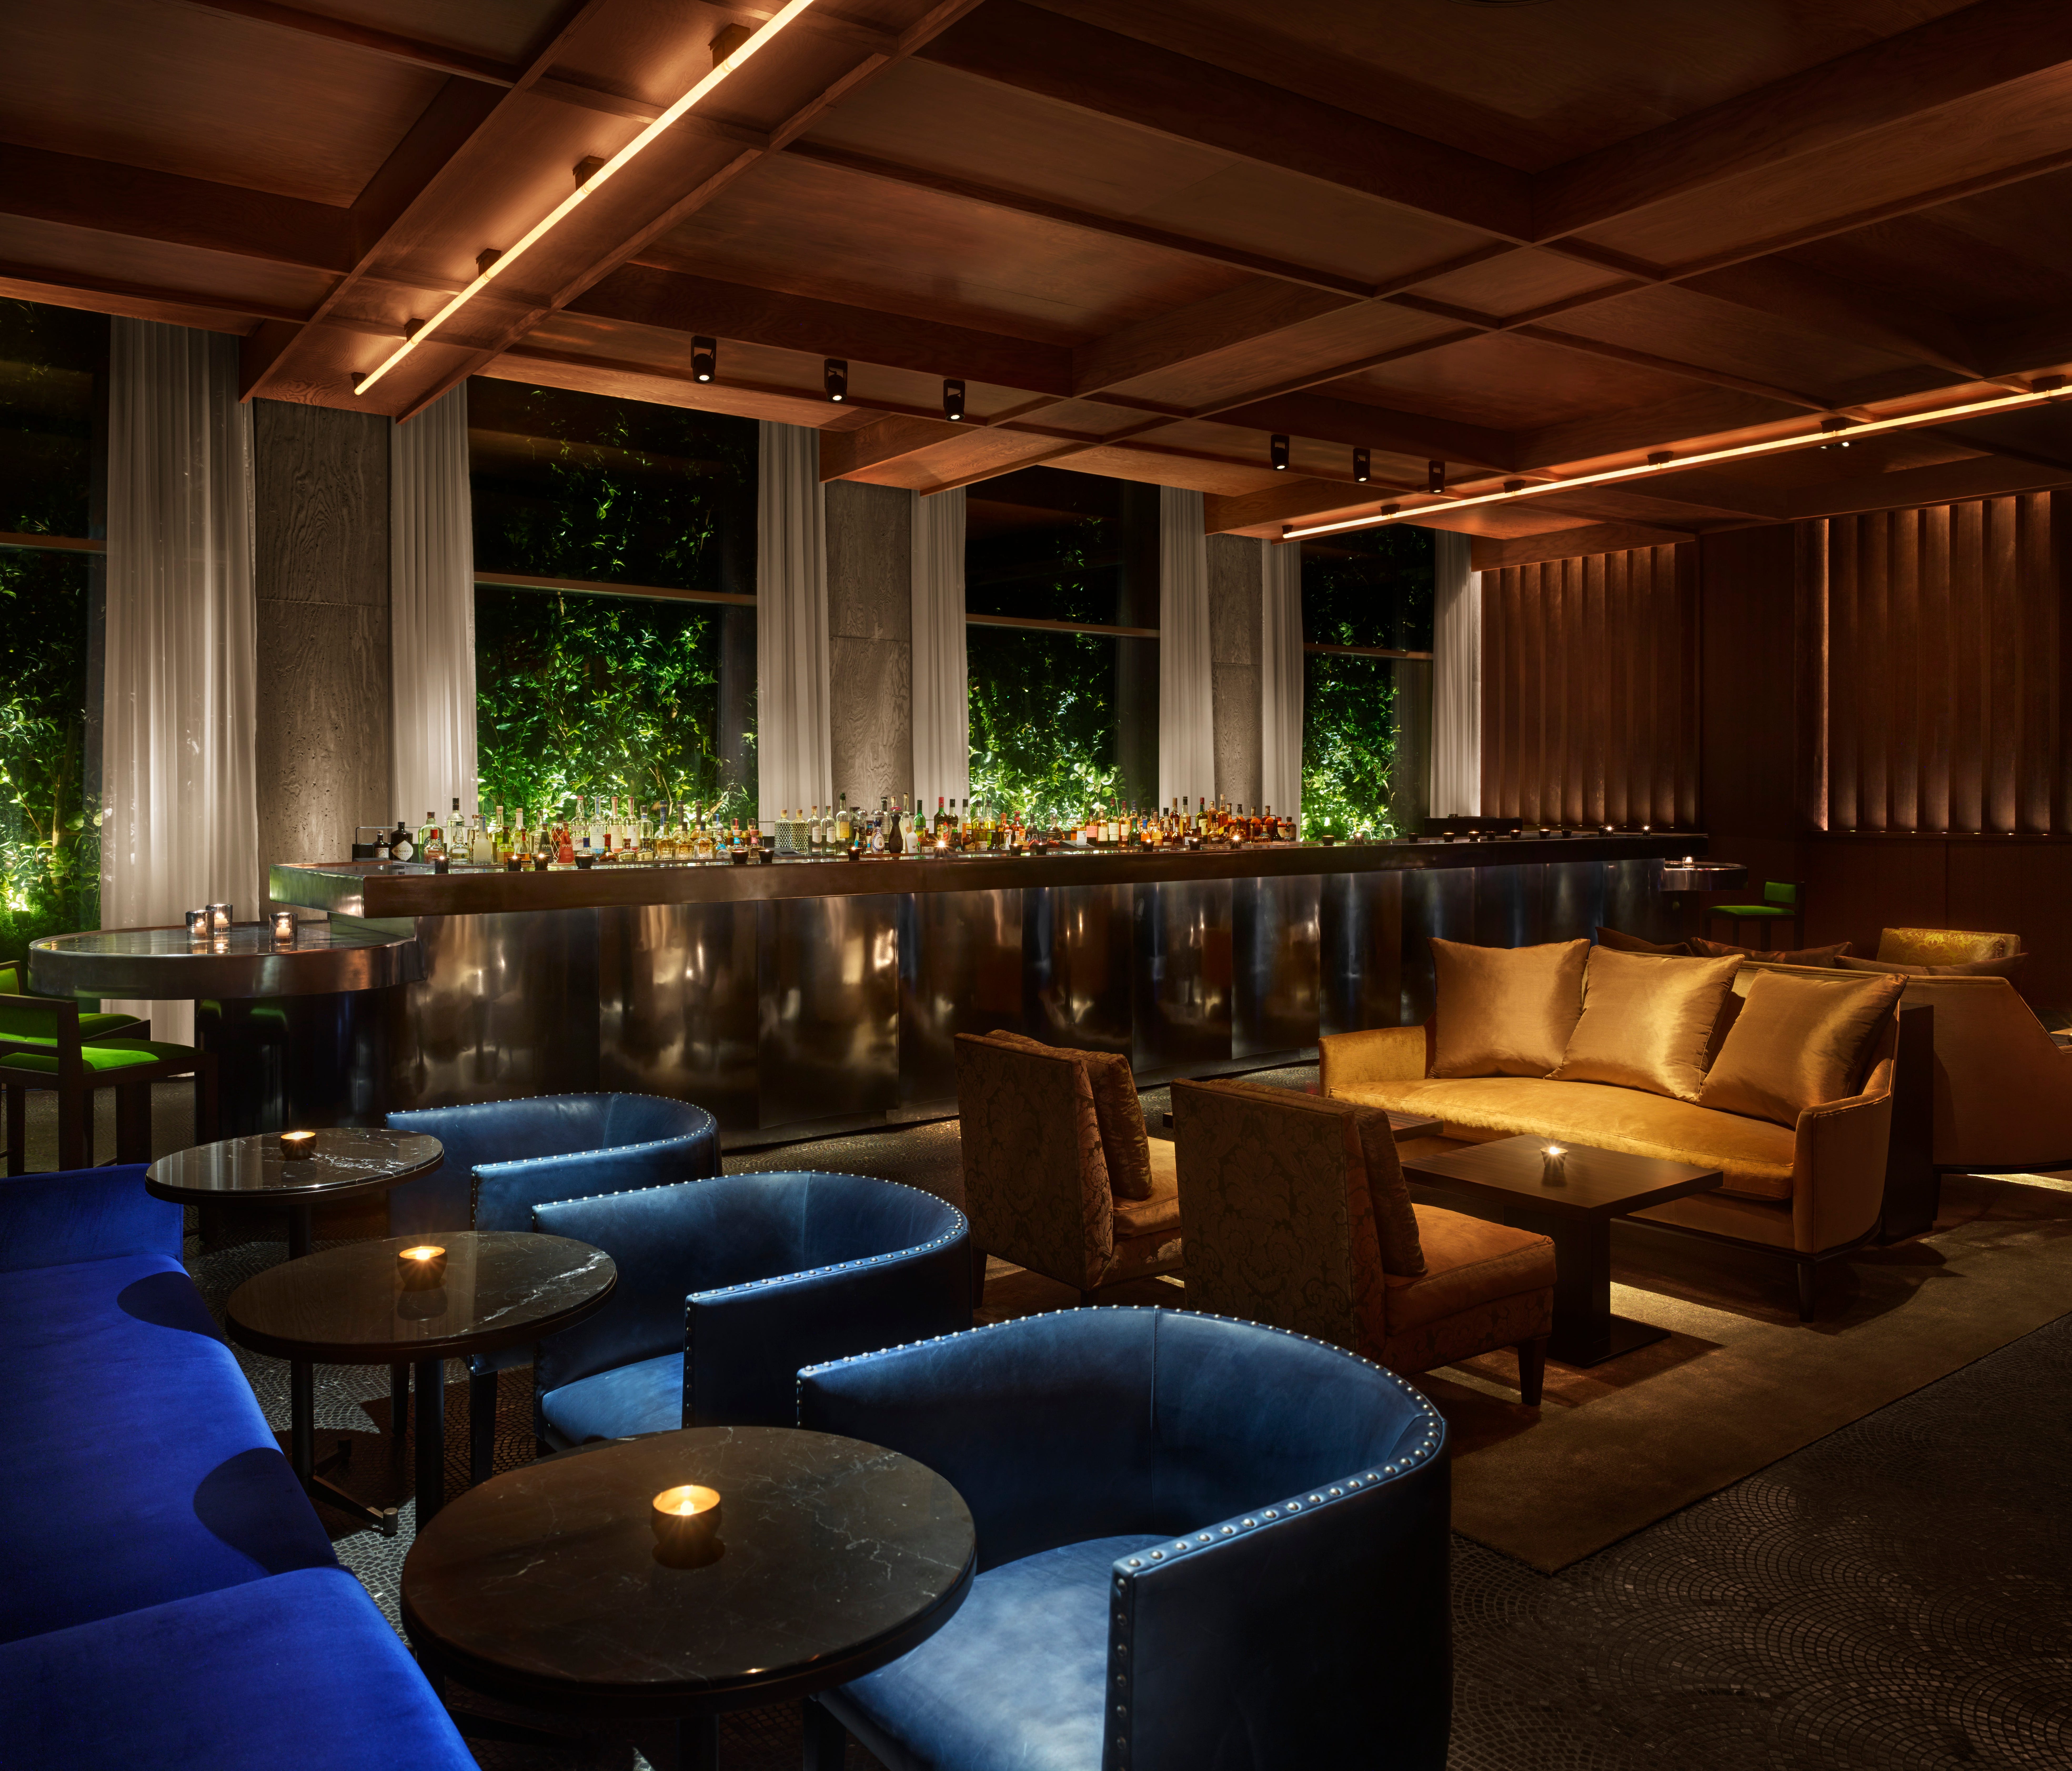 Diego is one of three bars at the new PUBLIC New York hotel by legendary hotelier Ian Schrager.